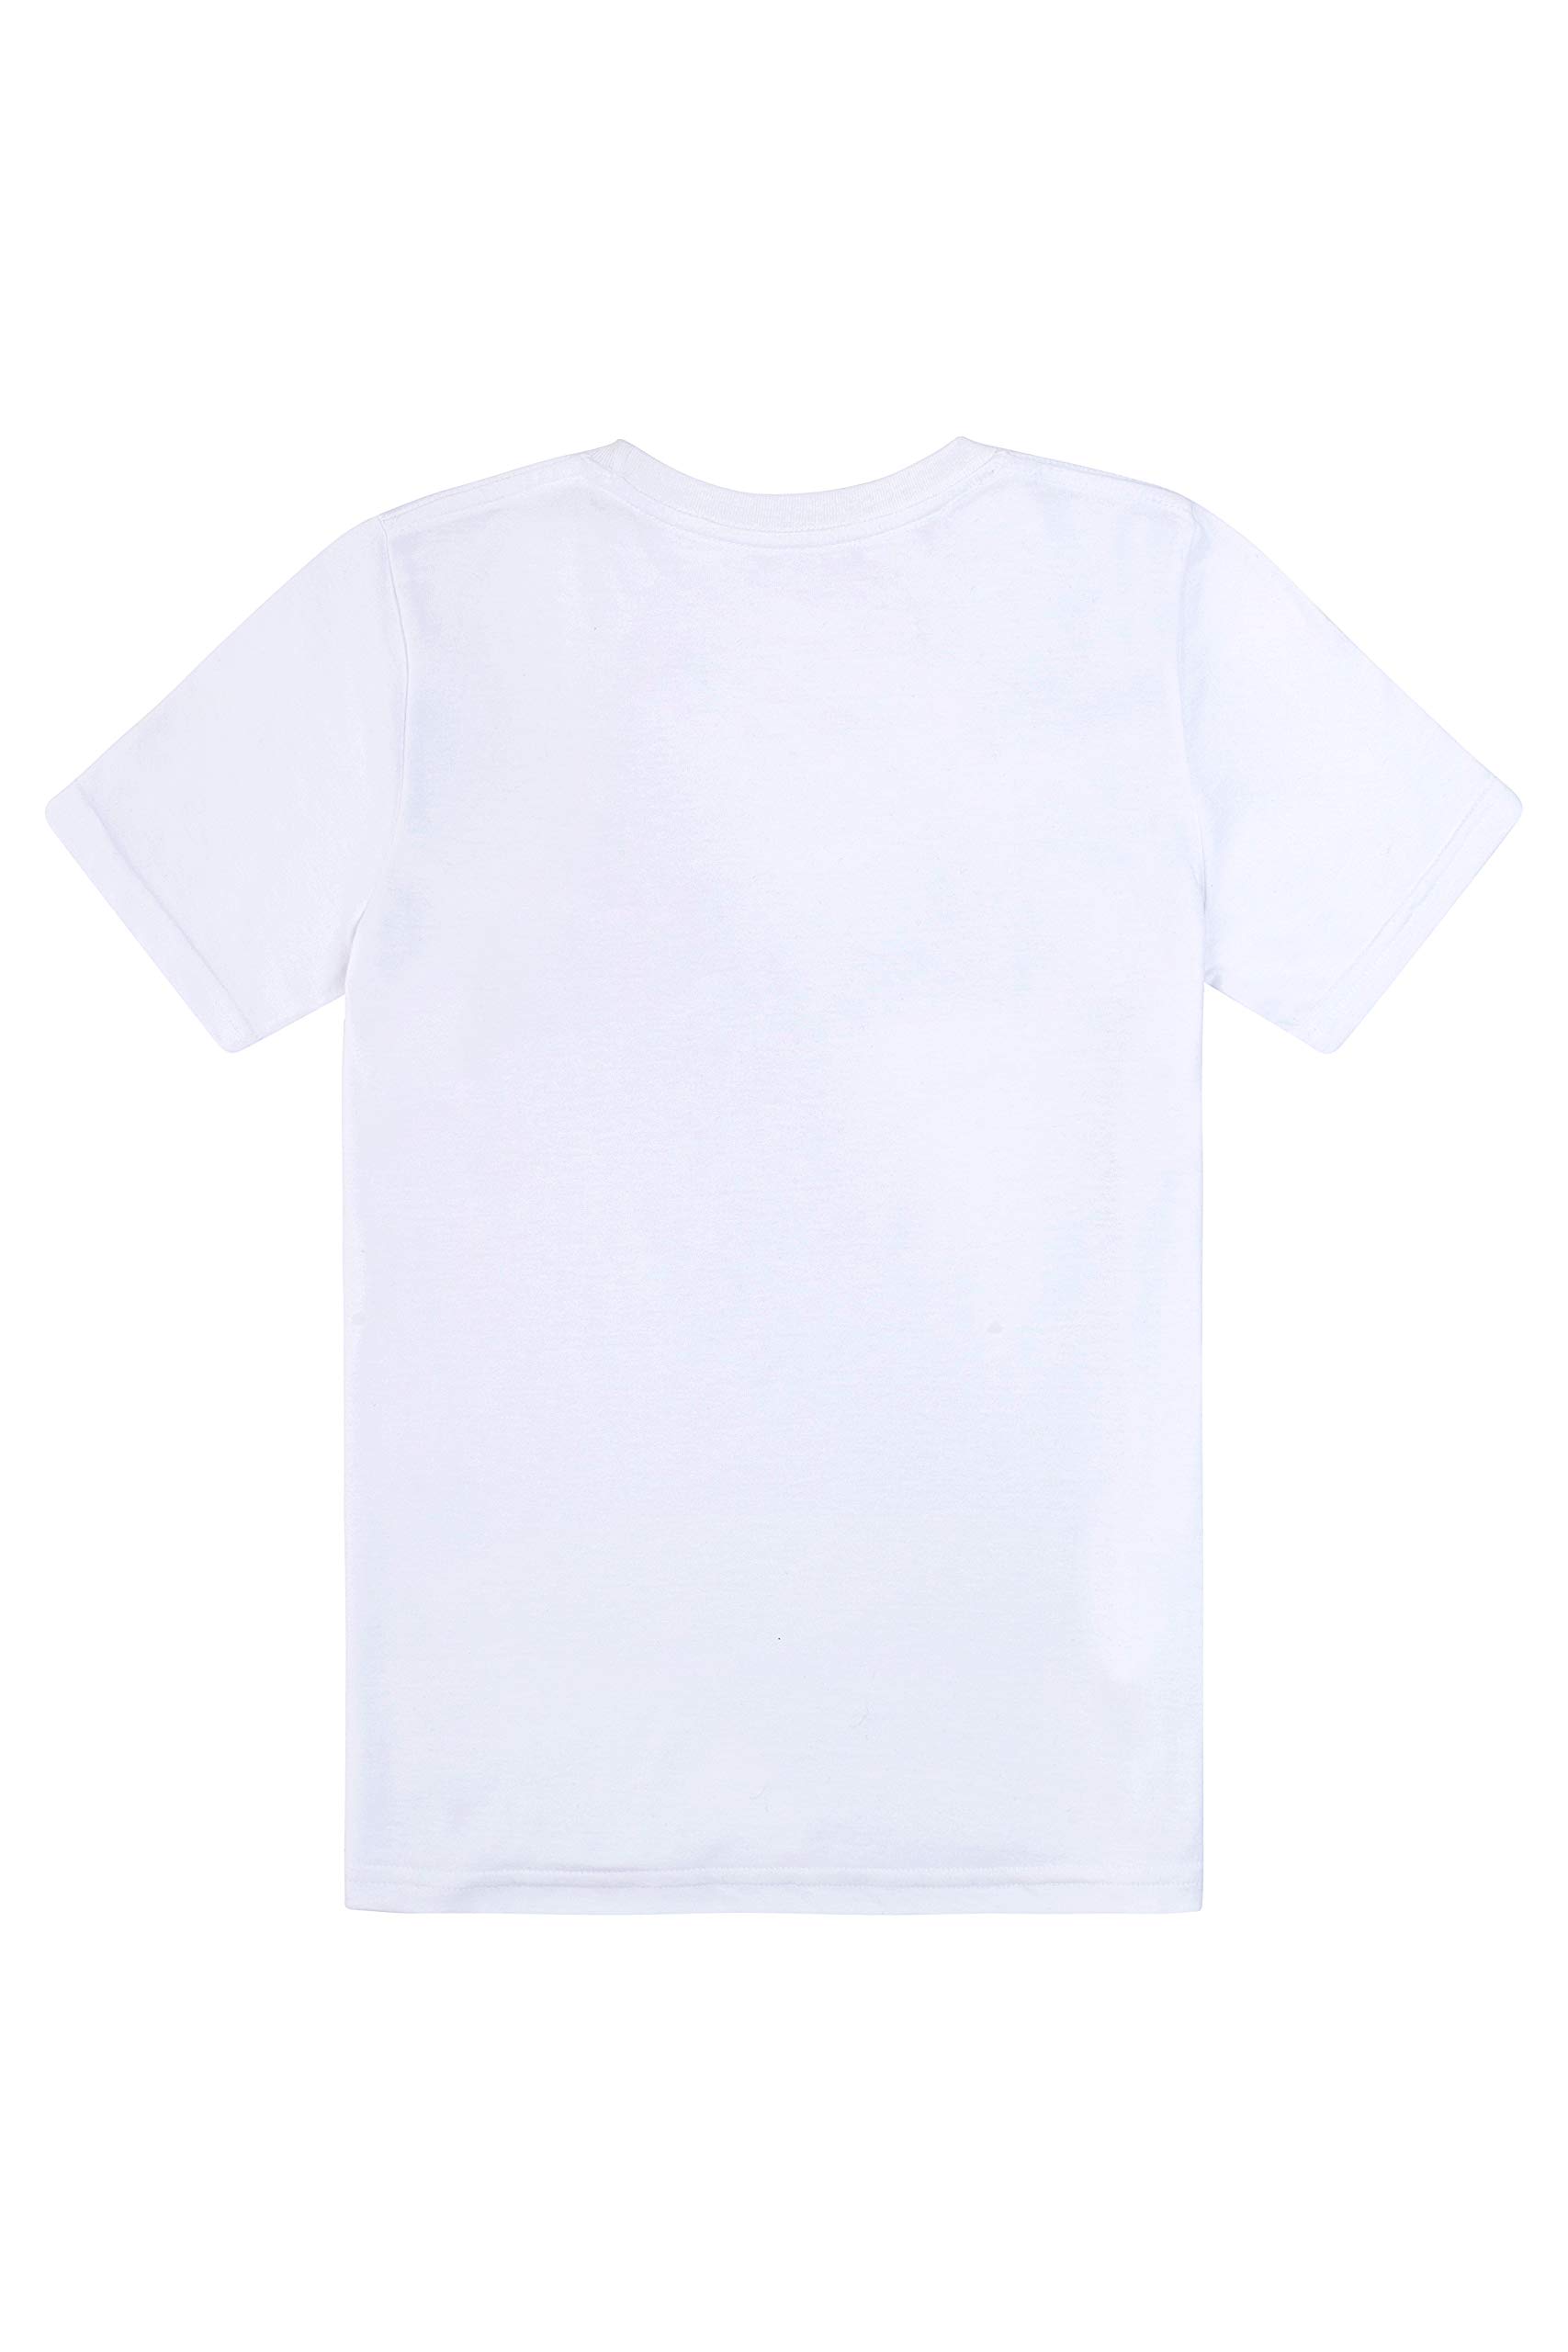 Champion Heritage Short Sleeve Cotton Logo Boys Active Shirts & Tees Size S, Color: Heritage White - image 2 of 7